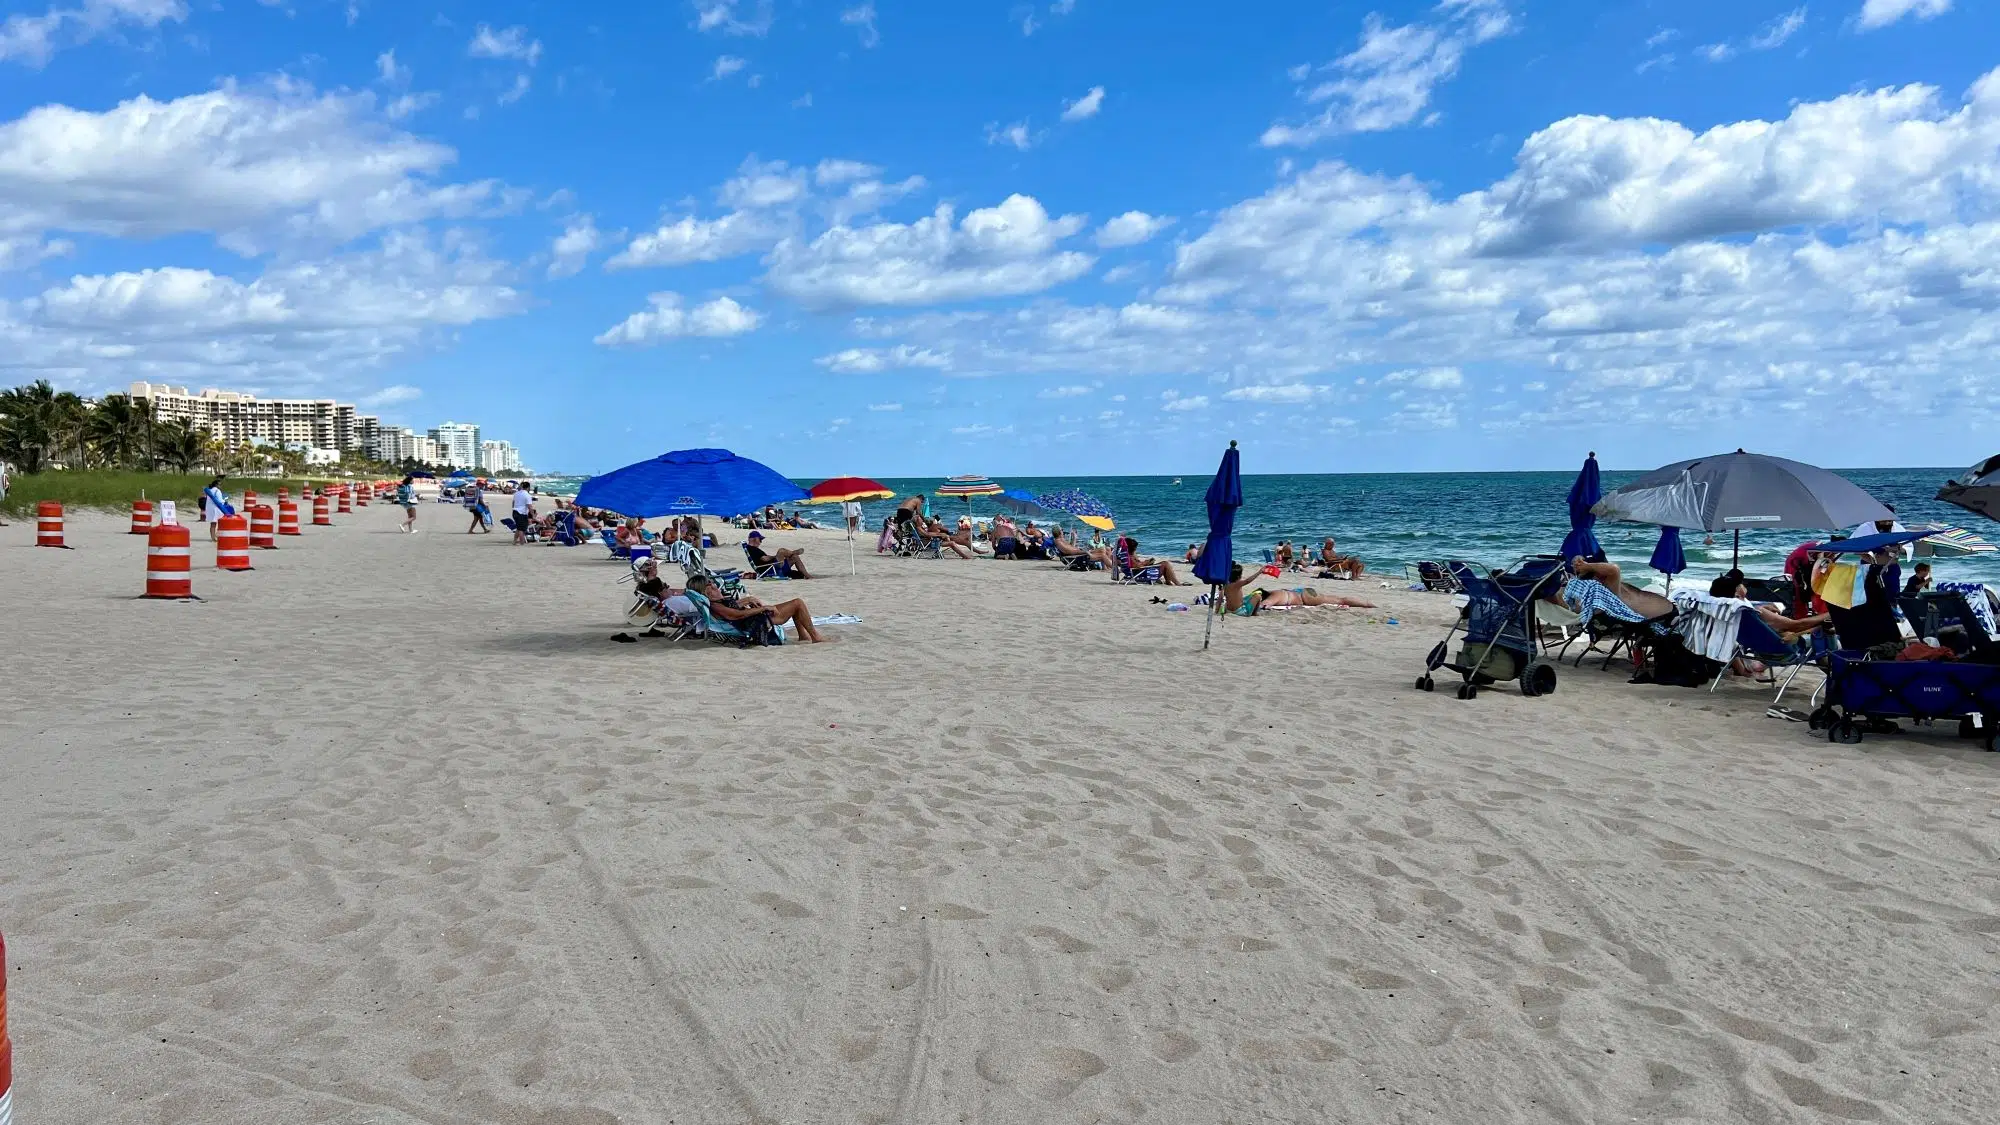 Beachside Bliss at Lauderdale-by-the-Sea